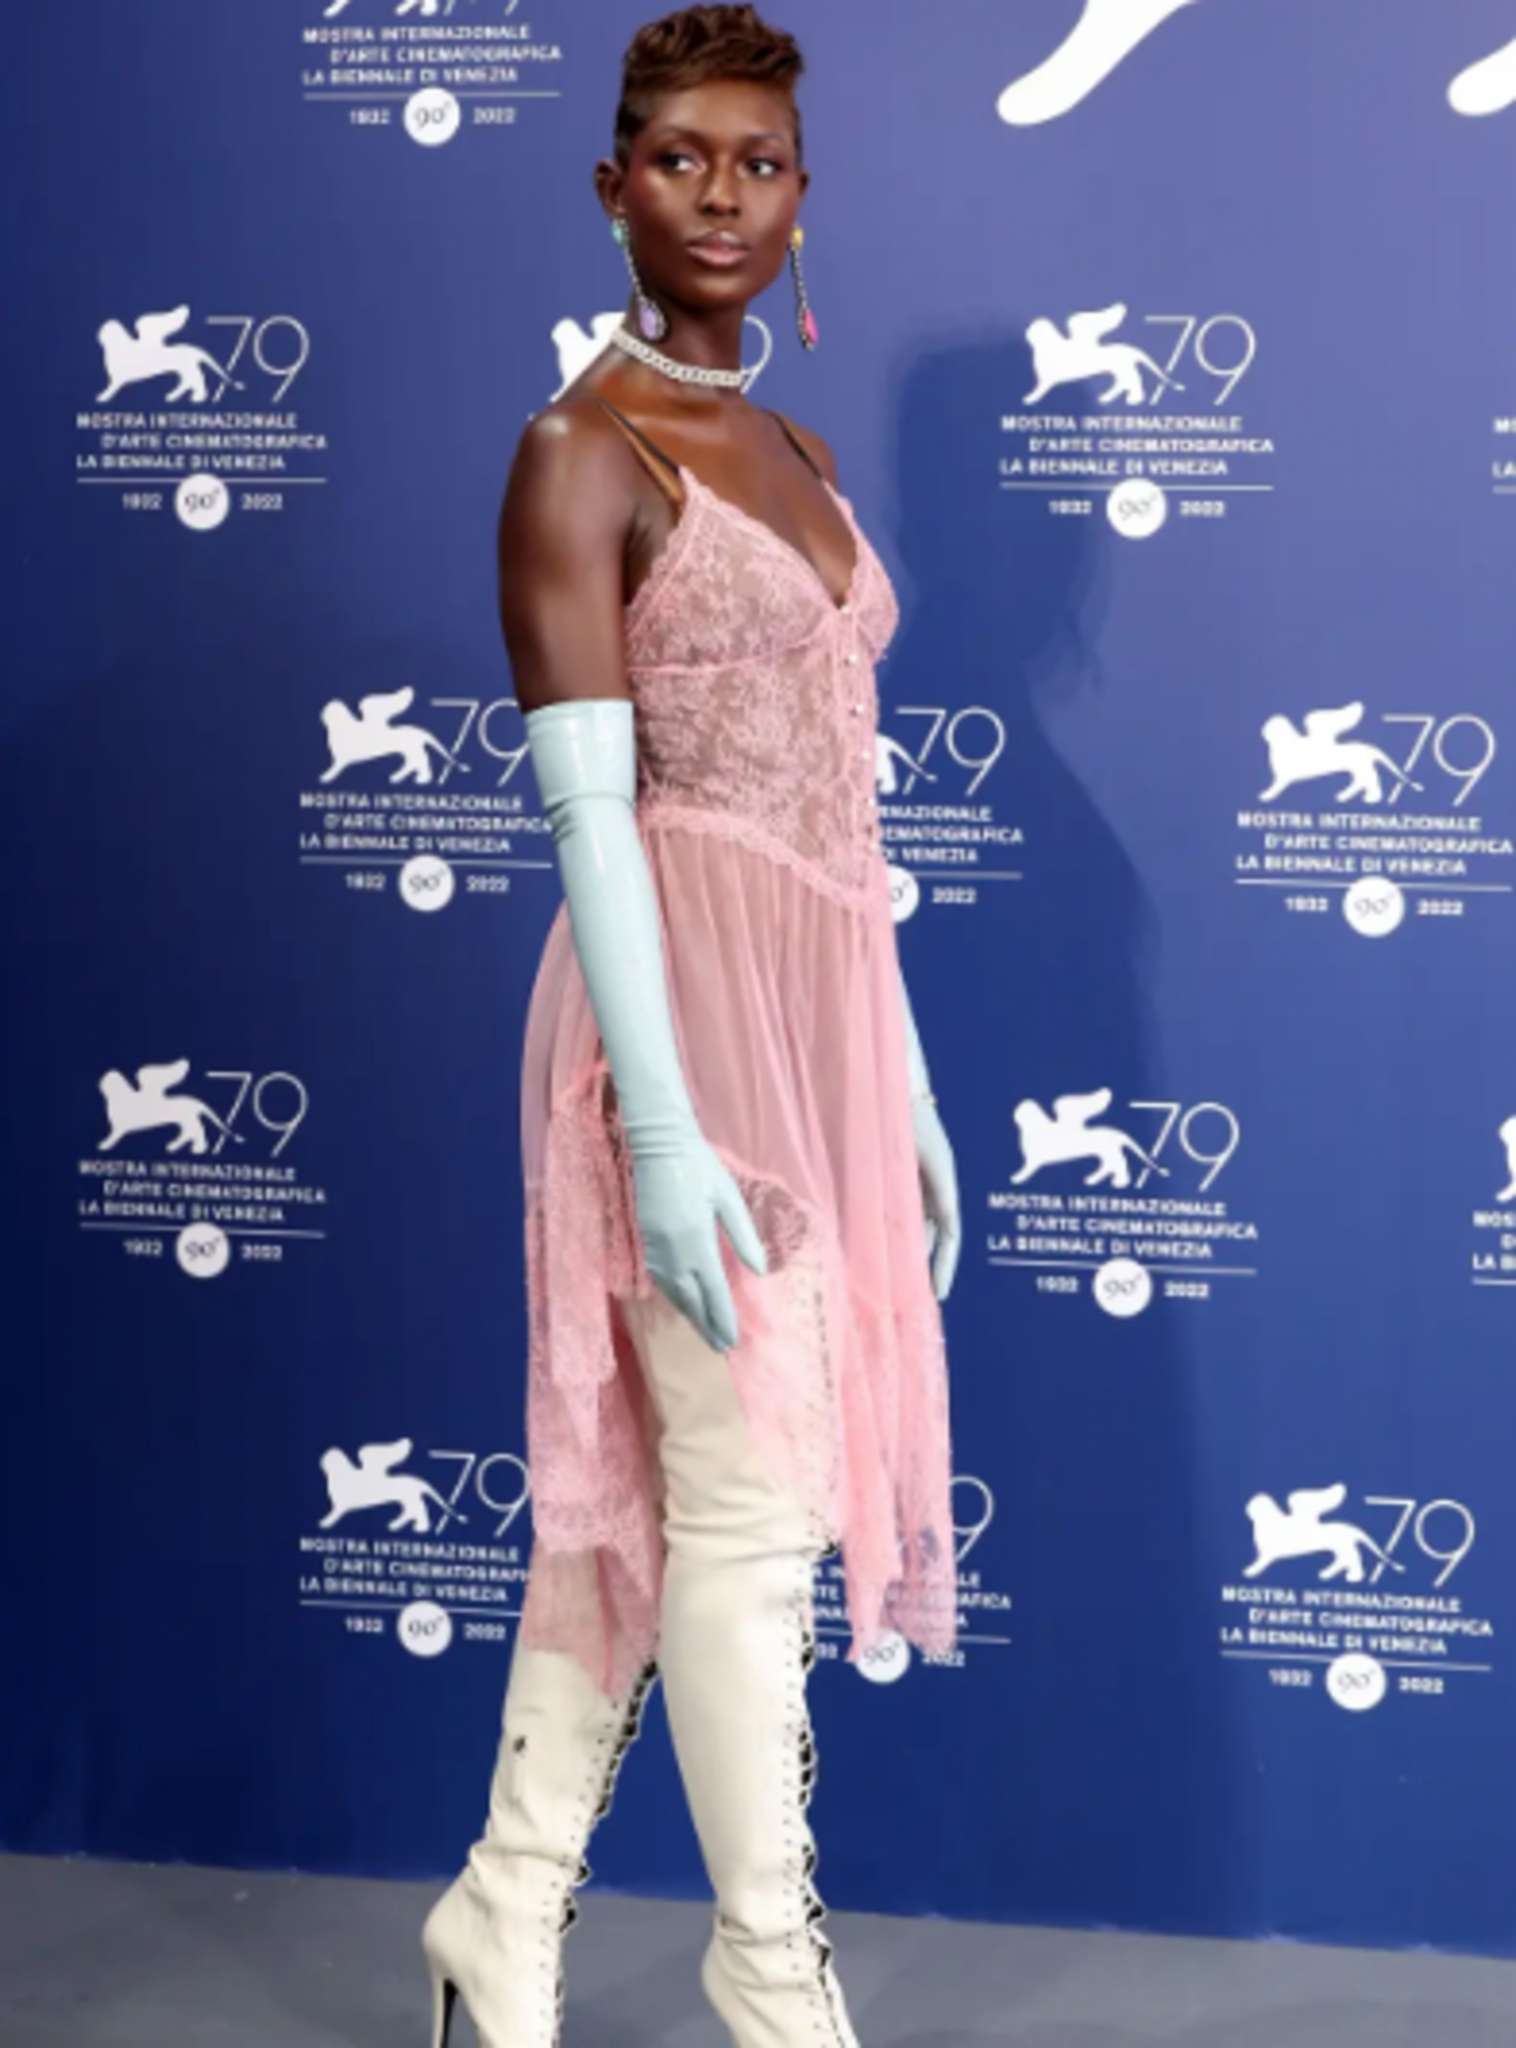 At The Venice Film Festival, Jodie Turner-Smith Wore A Barely-There Gucci Outfit And Looks Set For The Catwalk